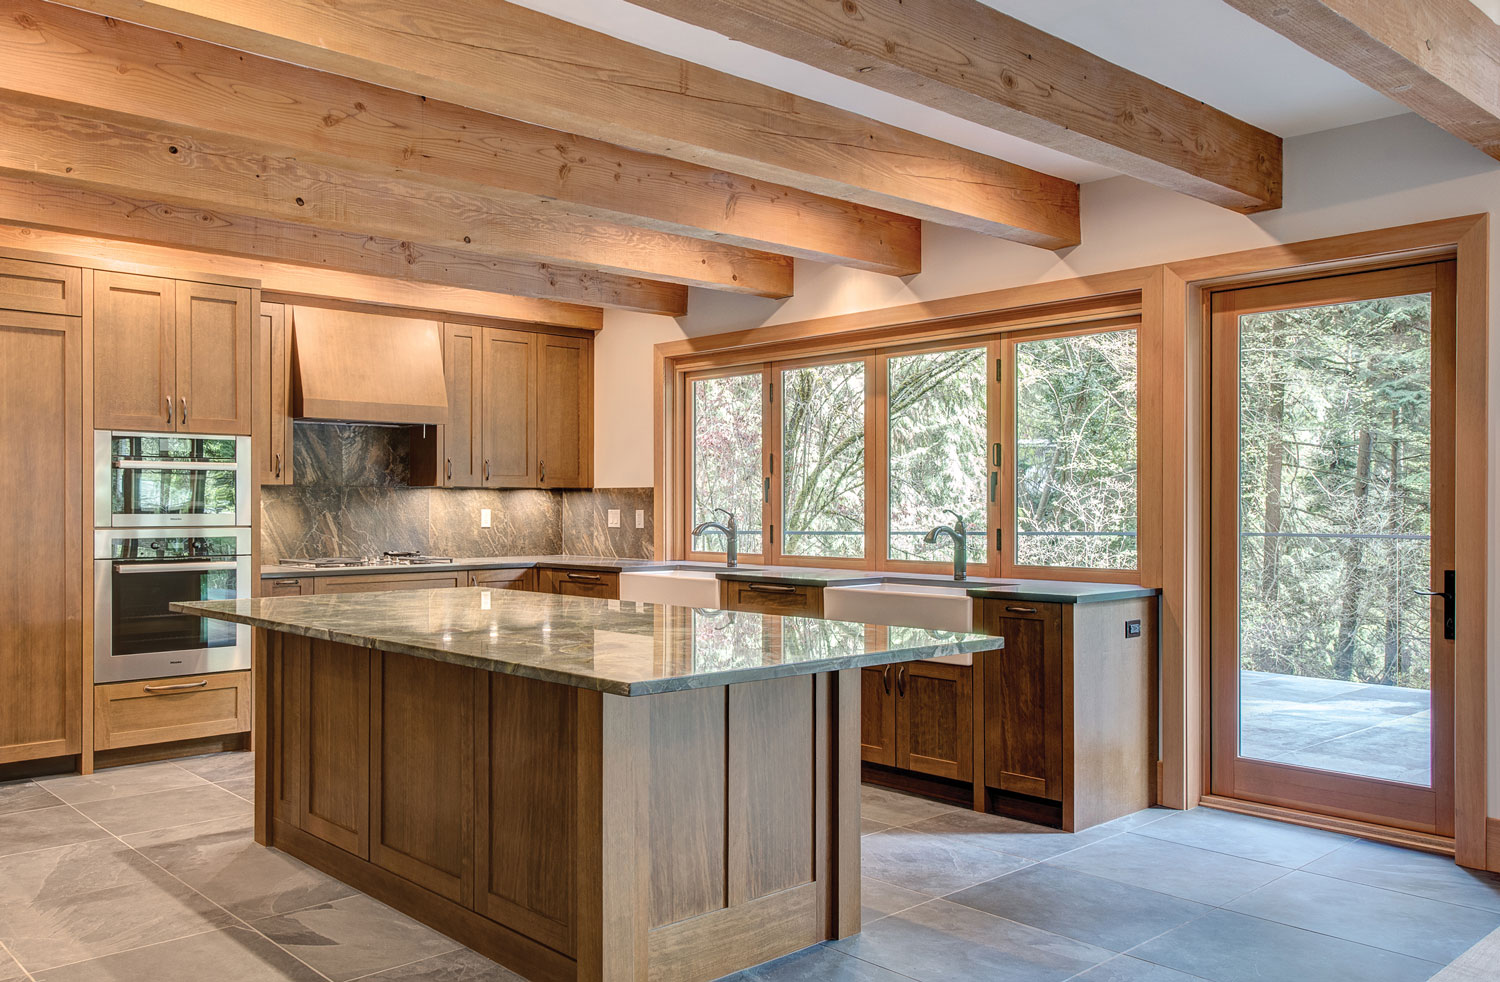 Beautiful kitchen with wood windows, door, and mouldings